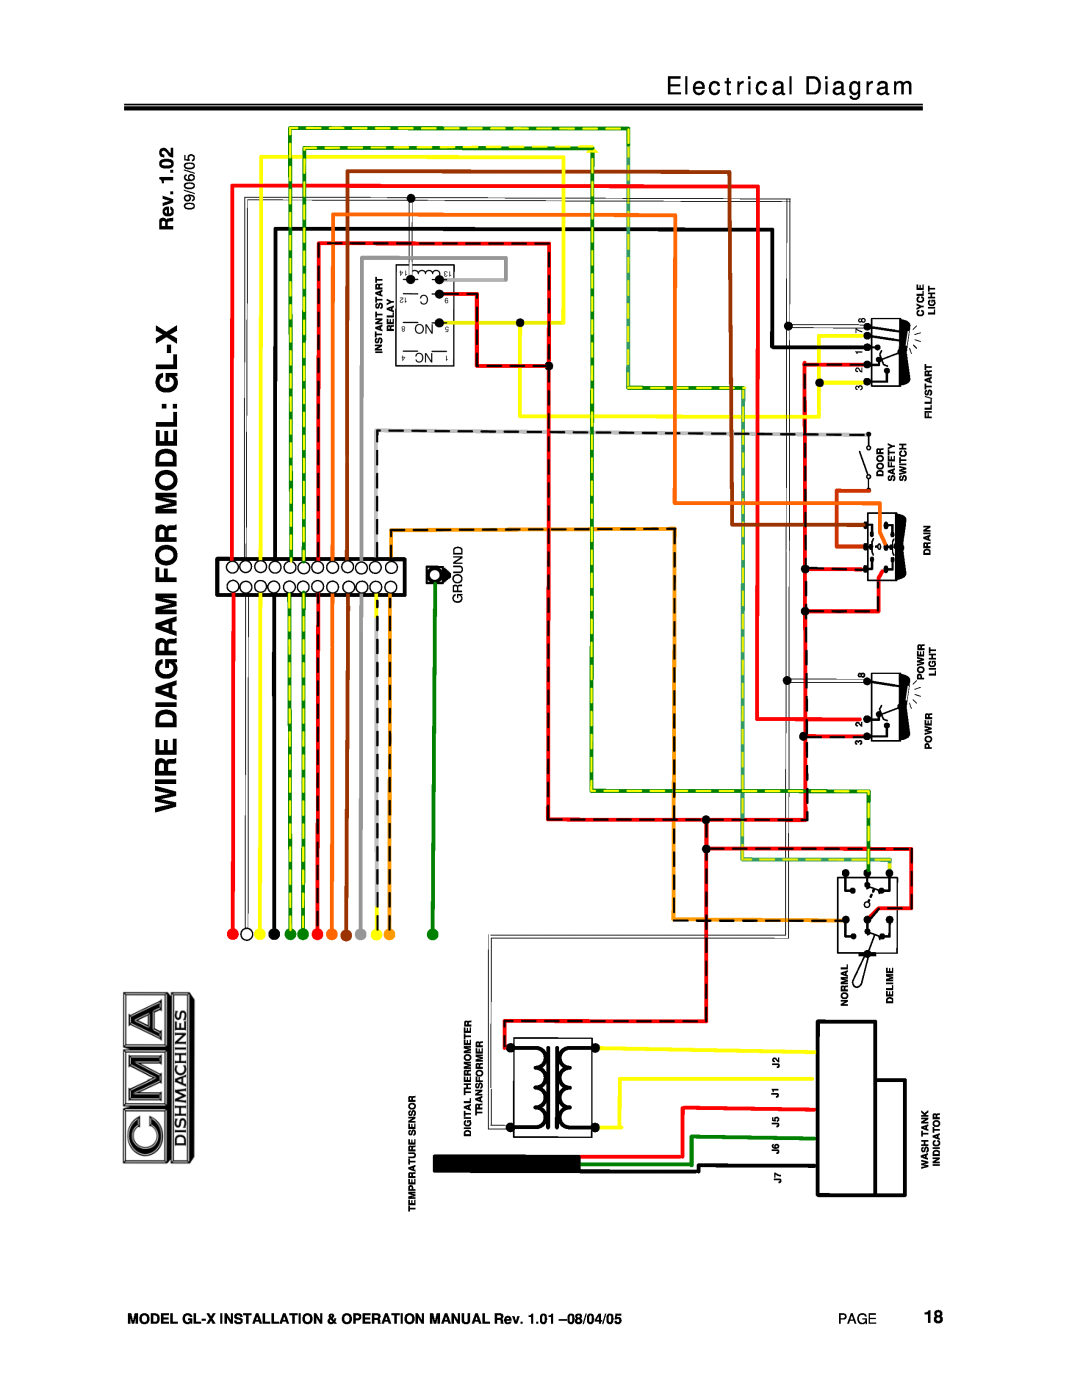 CMA Dishmachines GL-X owner manual Wire Diagram For Model Gl-X, Electrical Diagram, Rev.1.02, Ground 